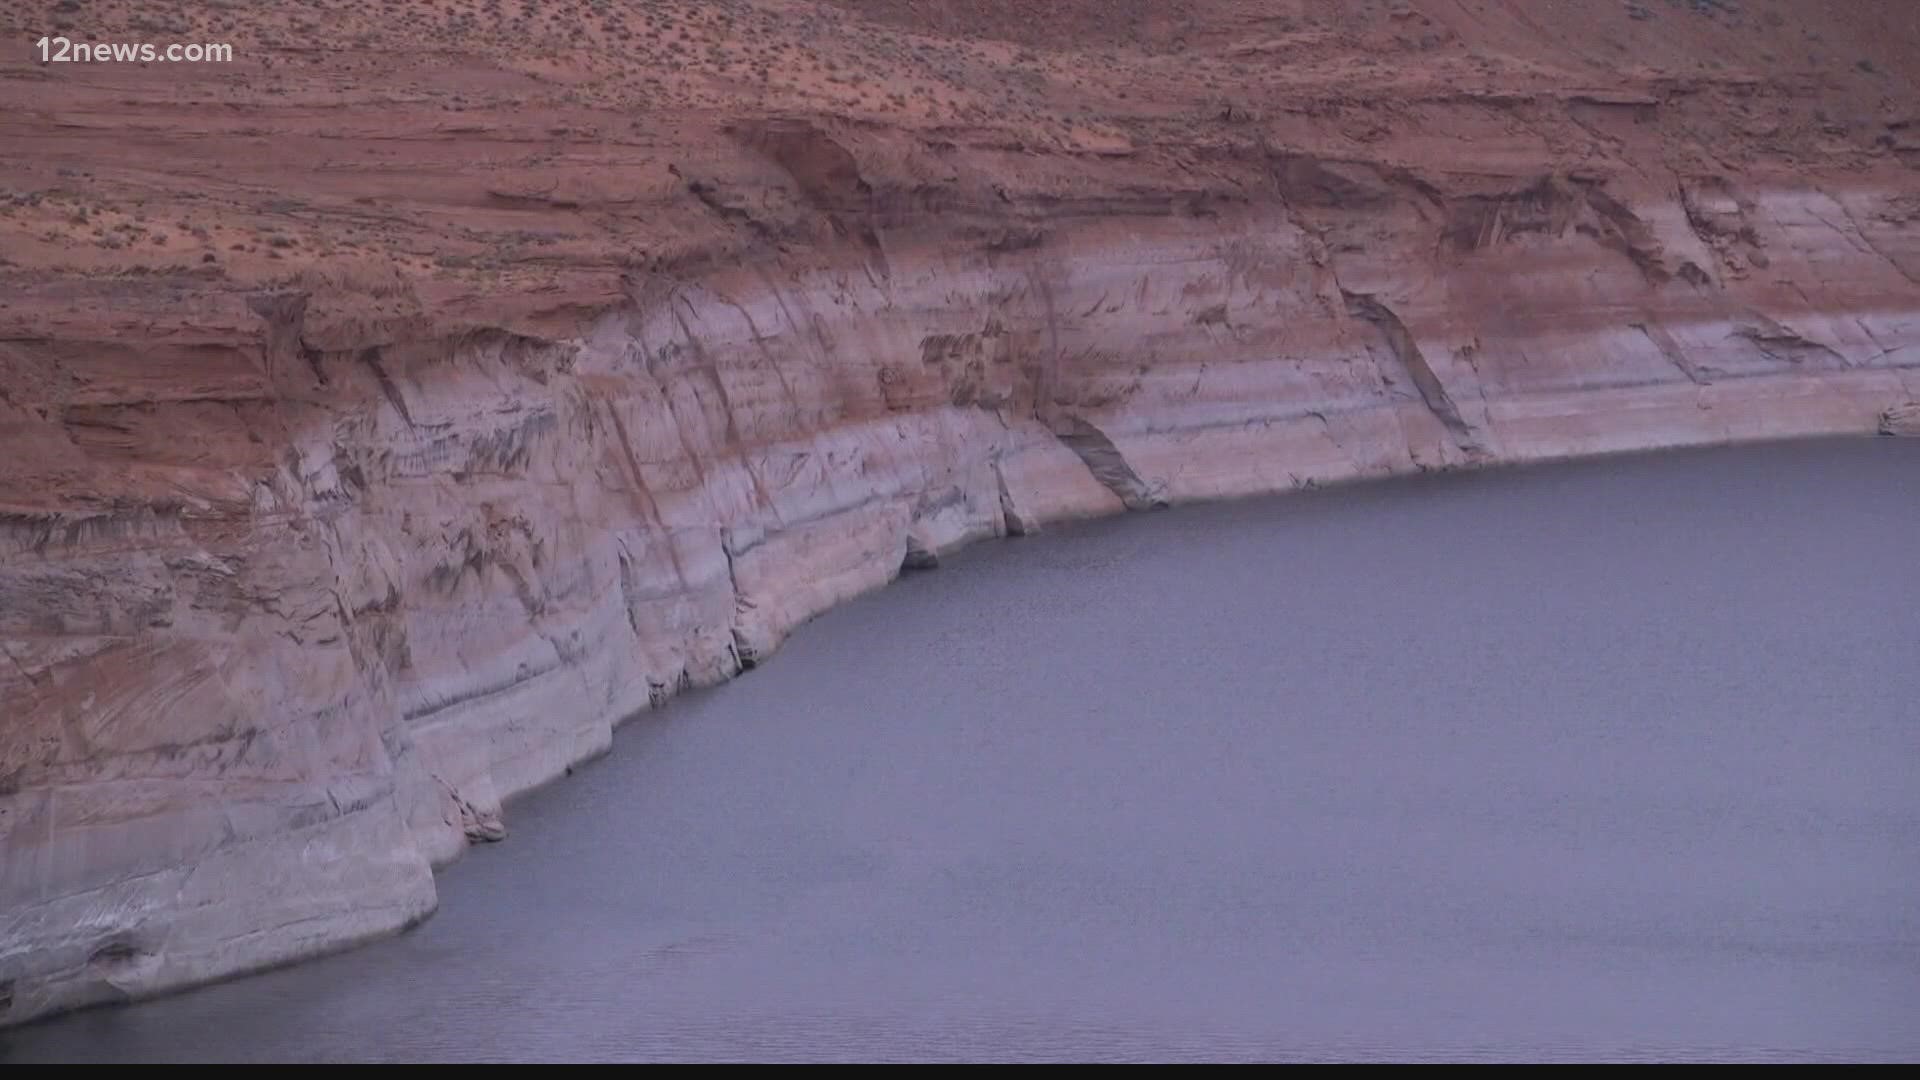 Lake Powell's fall to below 3,525 feet puts it at its lowest level since the lake was filled after the federal government dammed the Colorado River.